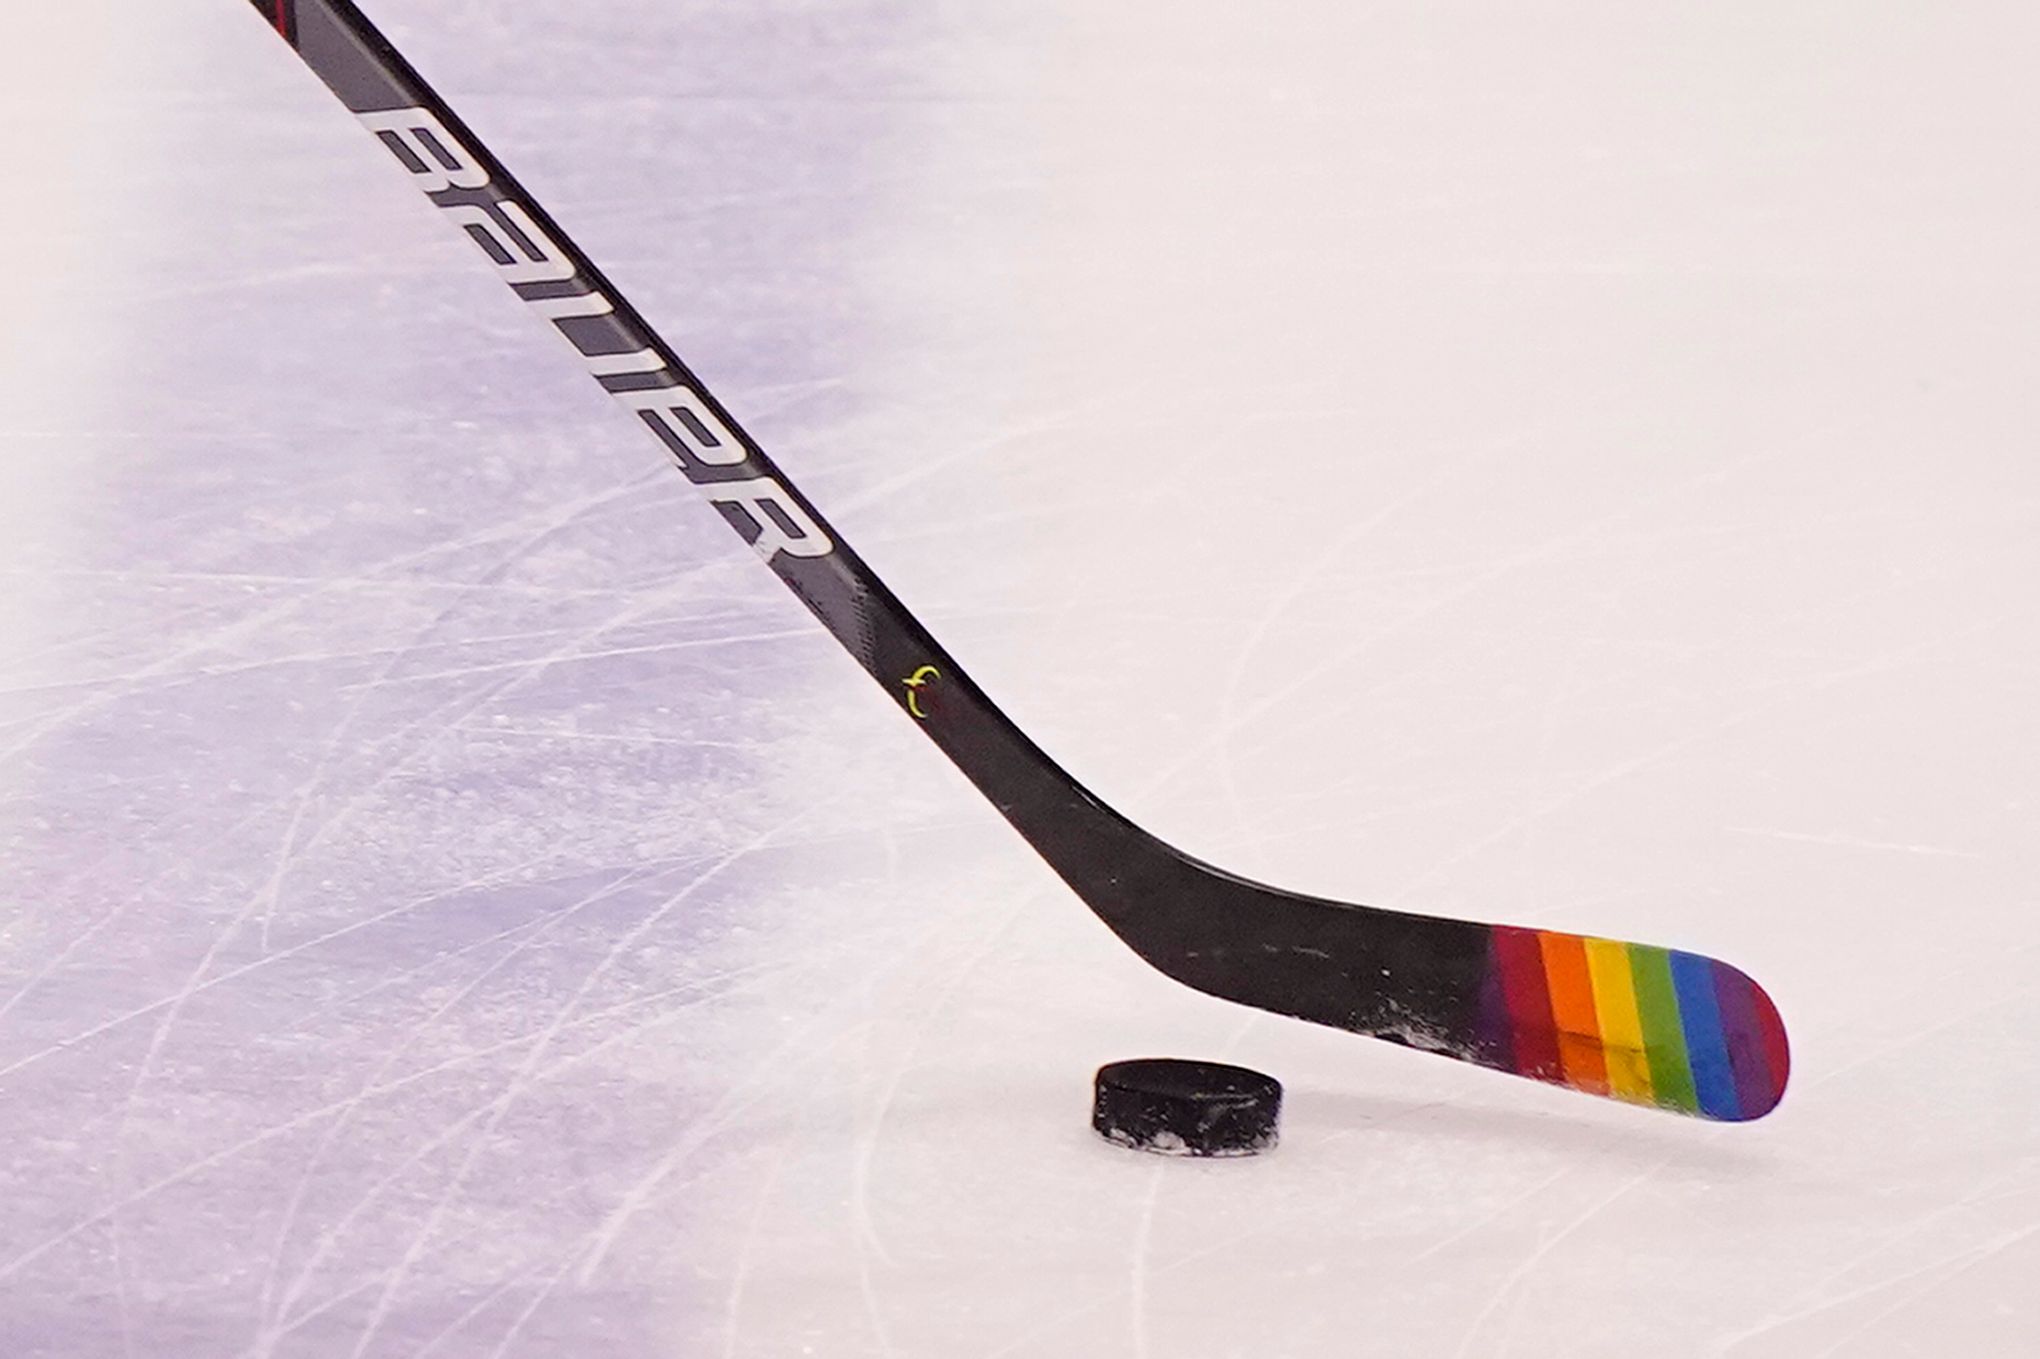 Wild players don't wear Pride jerseys for team's Pride Night - The Athletic